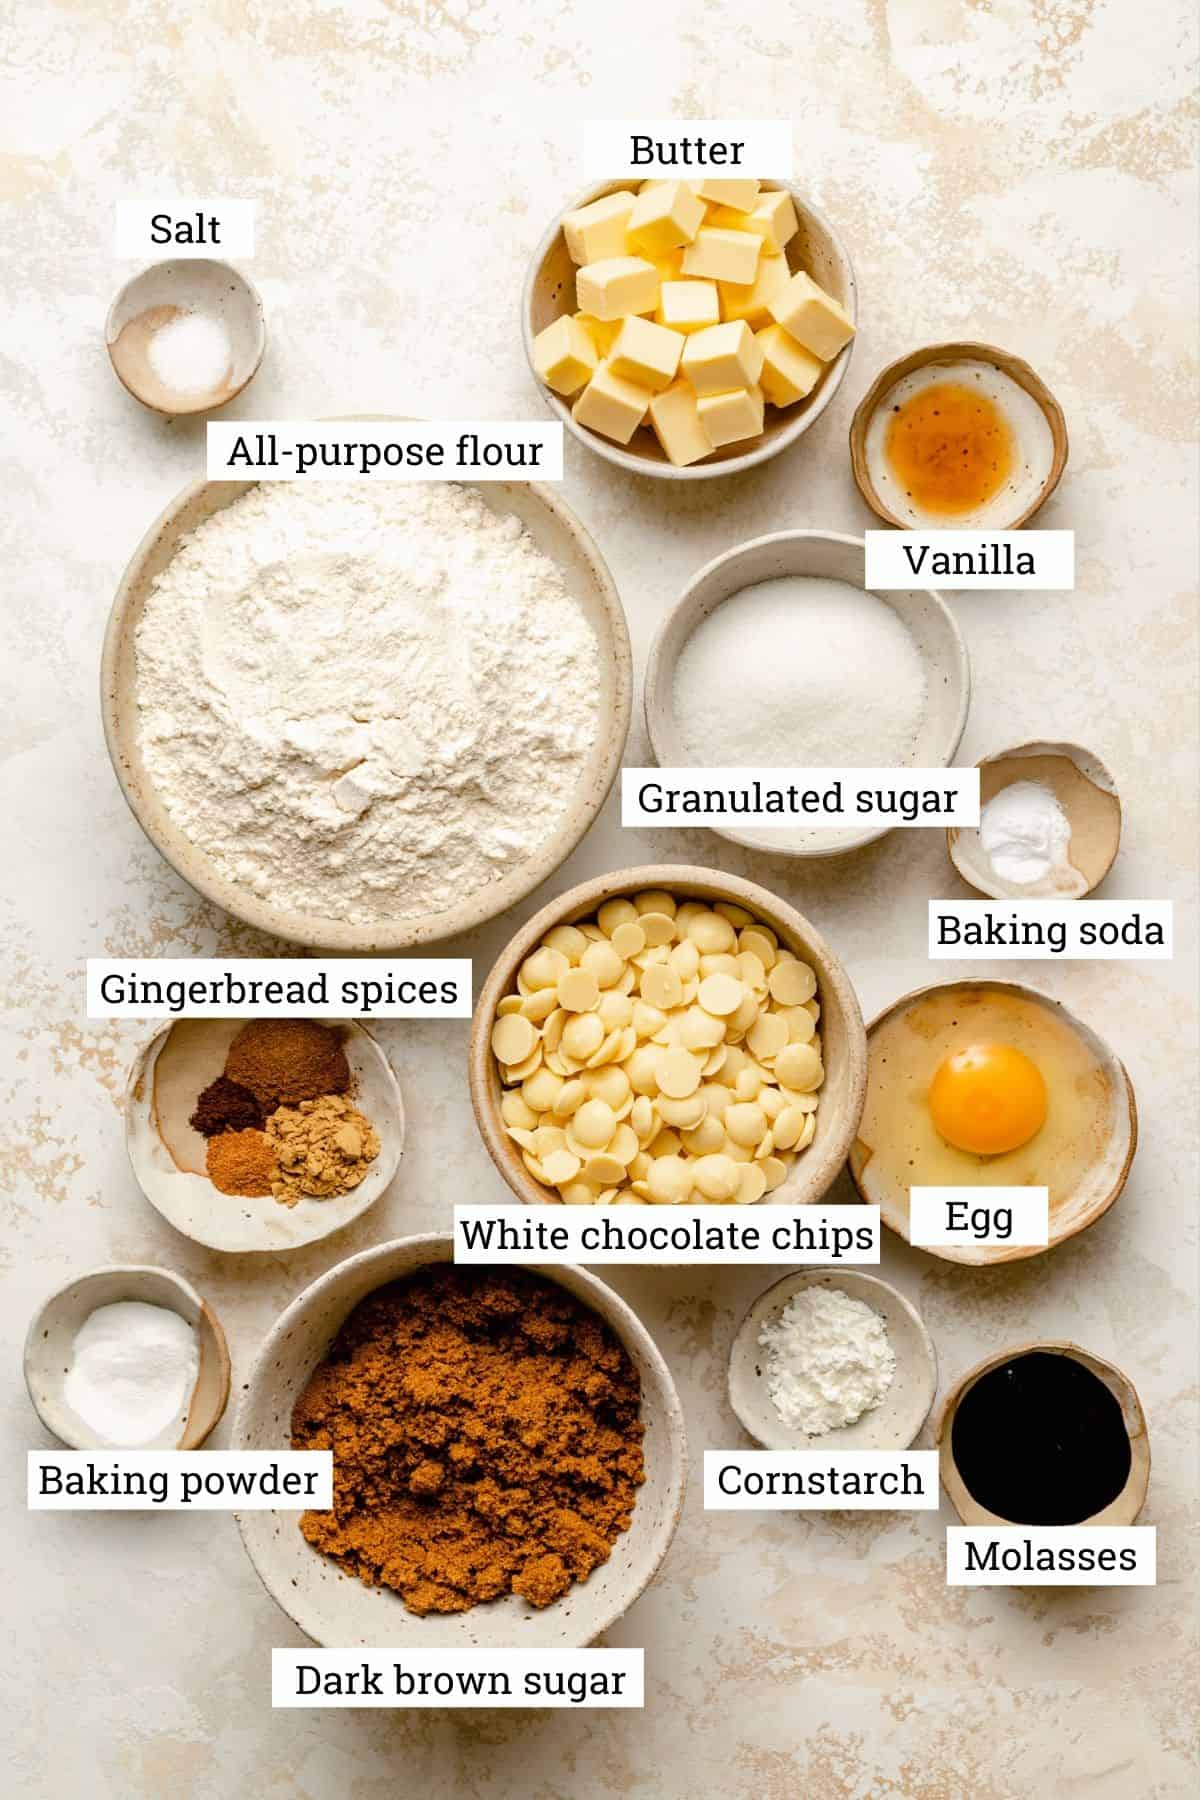 An array of bowls of ingredients to make gingerbread swirl cookies including, sugar, flour, chocolate buttons and spices.